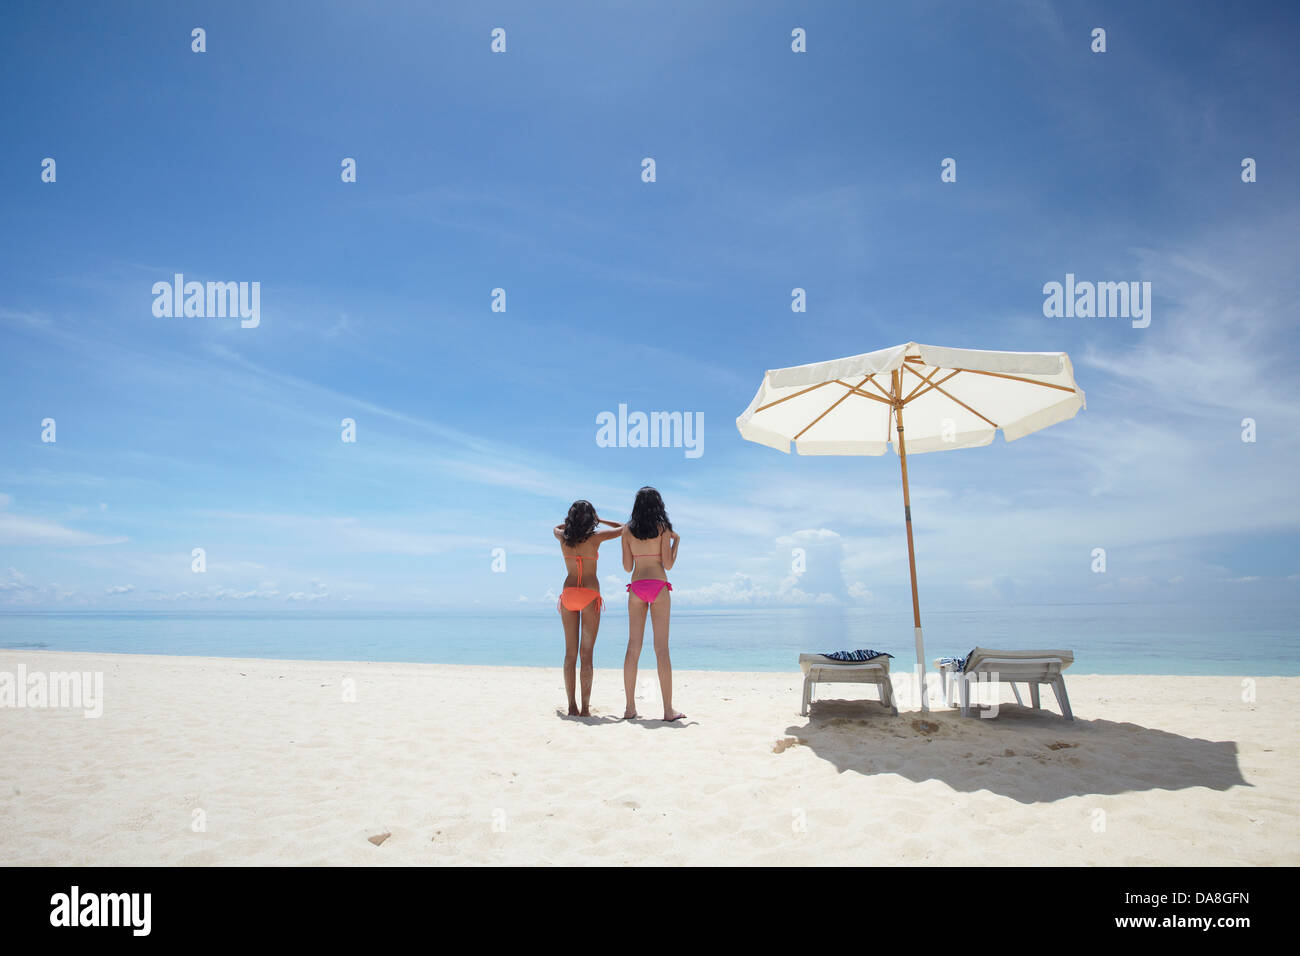 Friends relaxing on a beach. Stock Photo